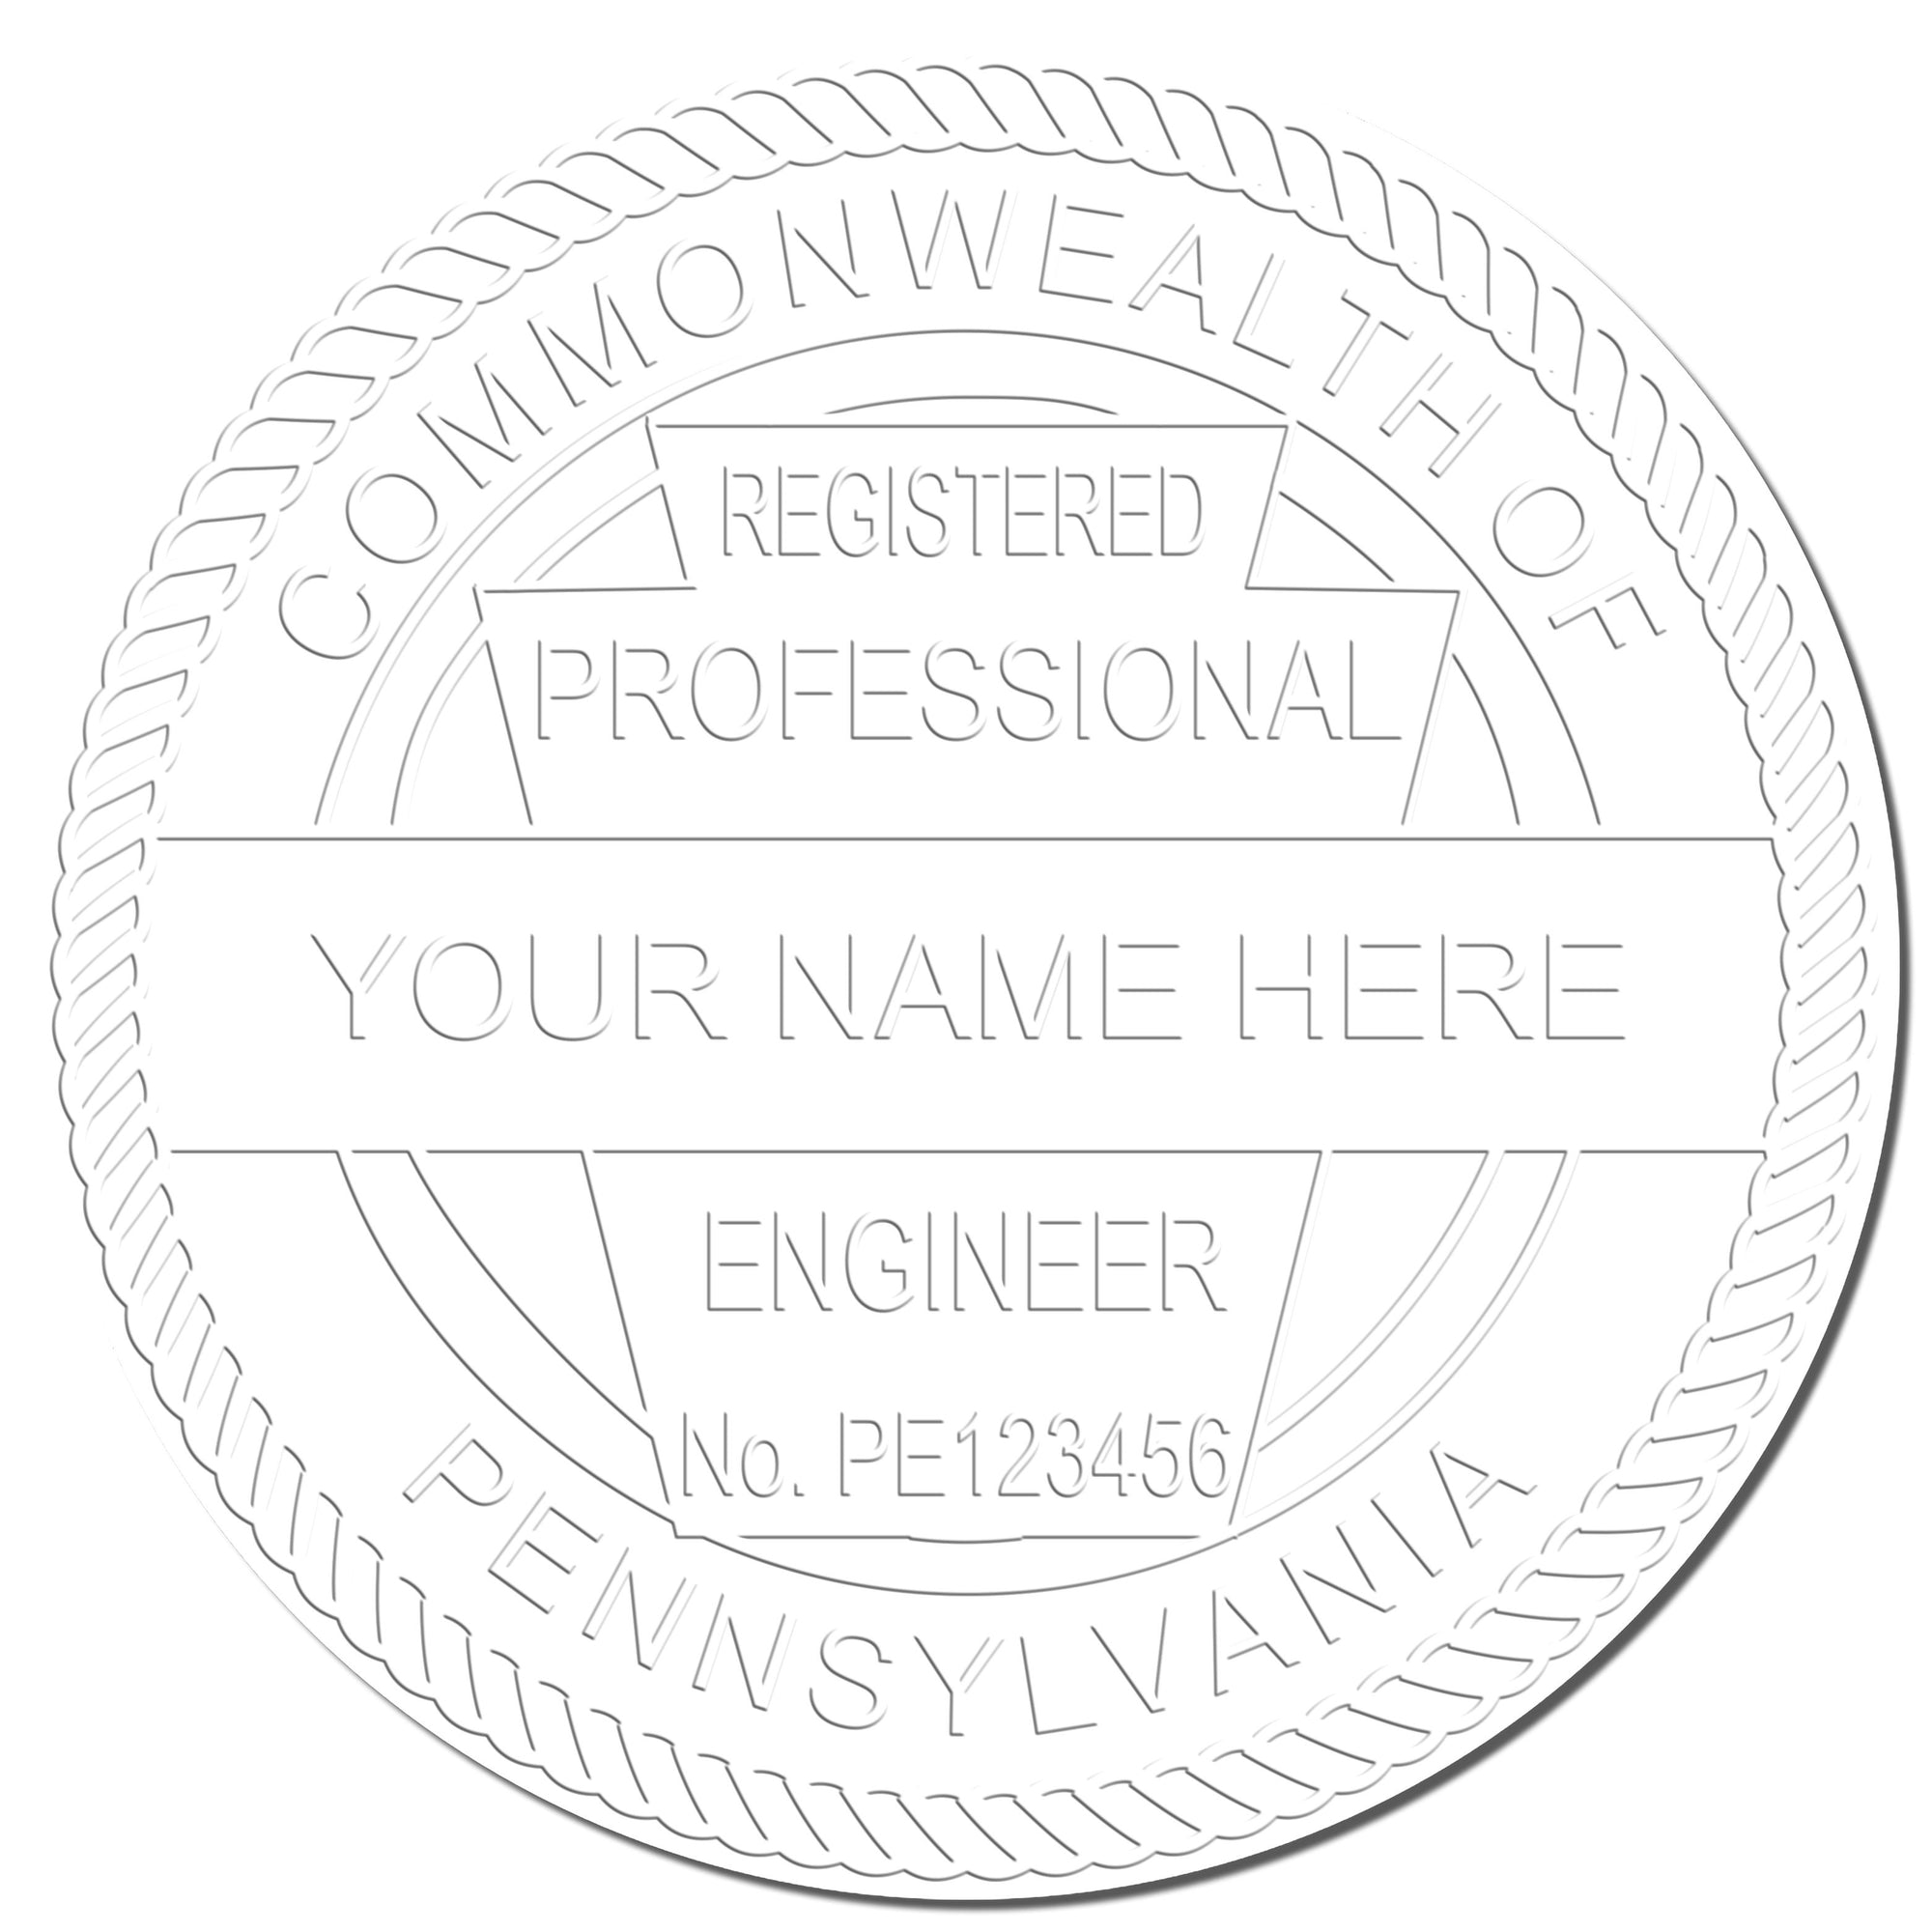 The main image for the Pennsylvania Engineer Desk Seal depicting a sample of the imprint and electronic files